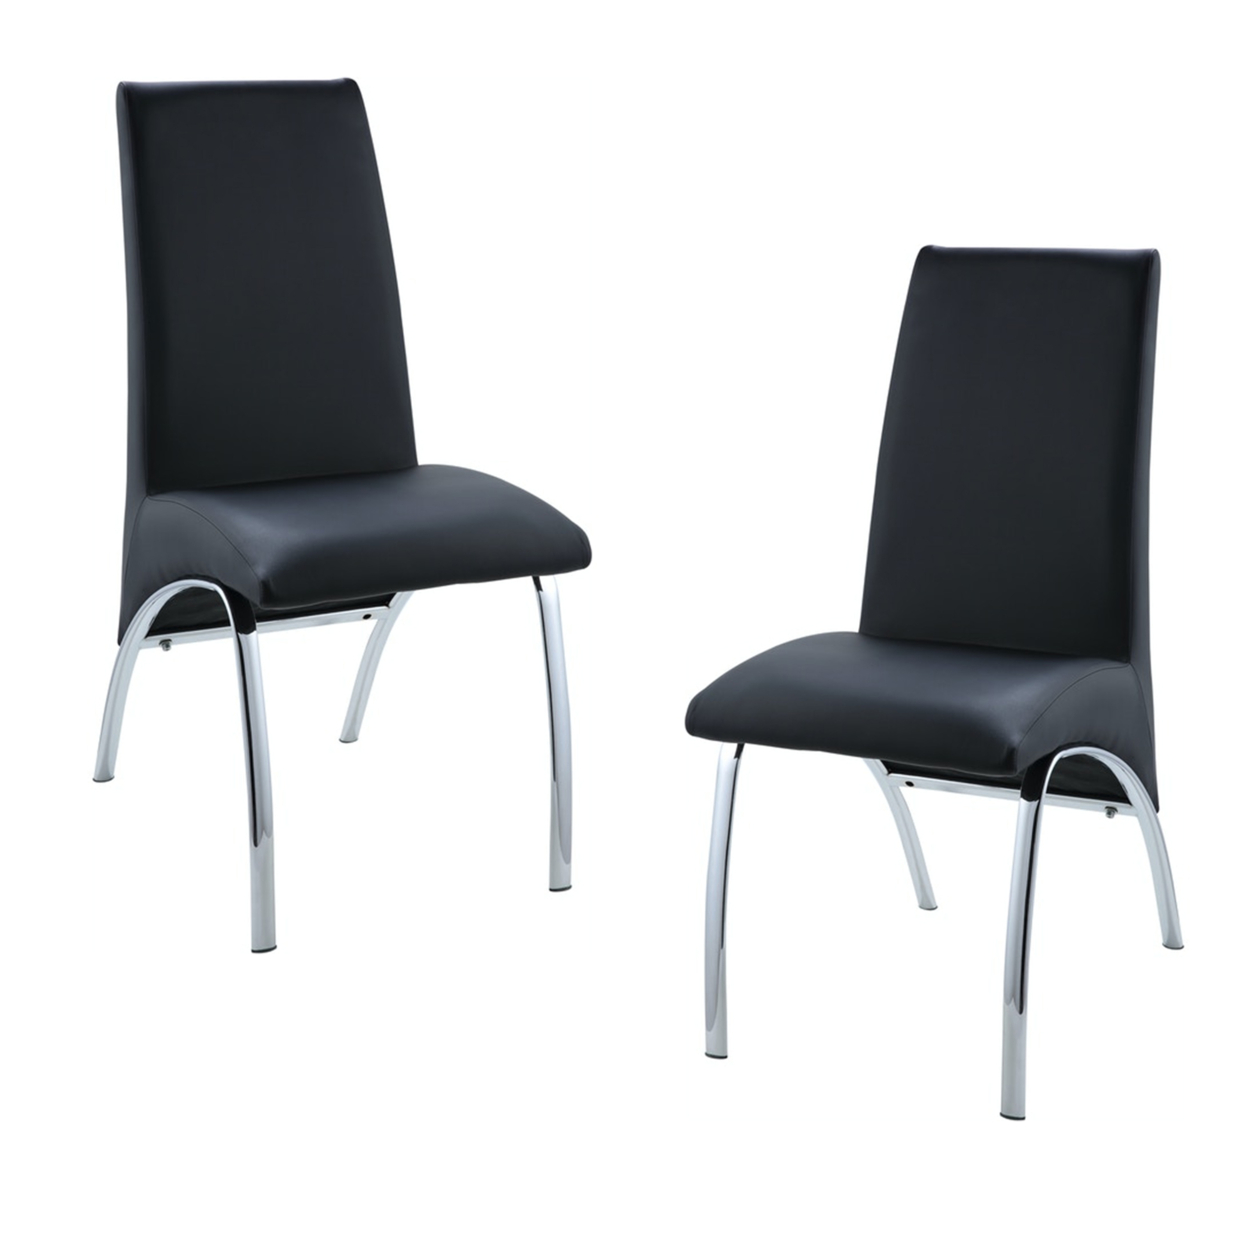 Leatherette Upholstered Side Chairs With Metal Base, Black And Silver, Set Of Two- Saltoro Sherpi